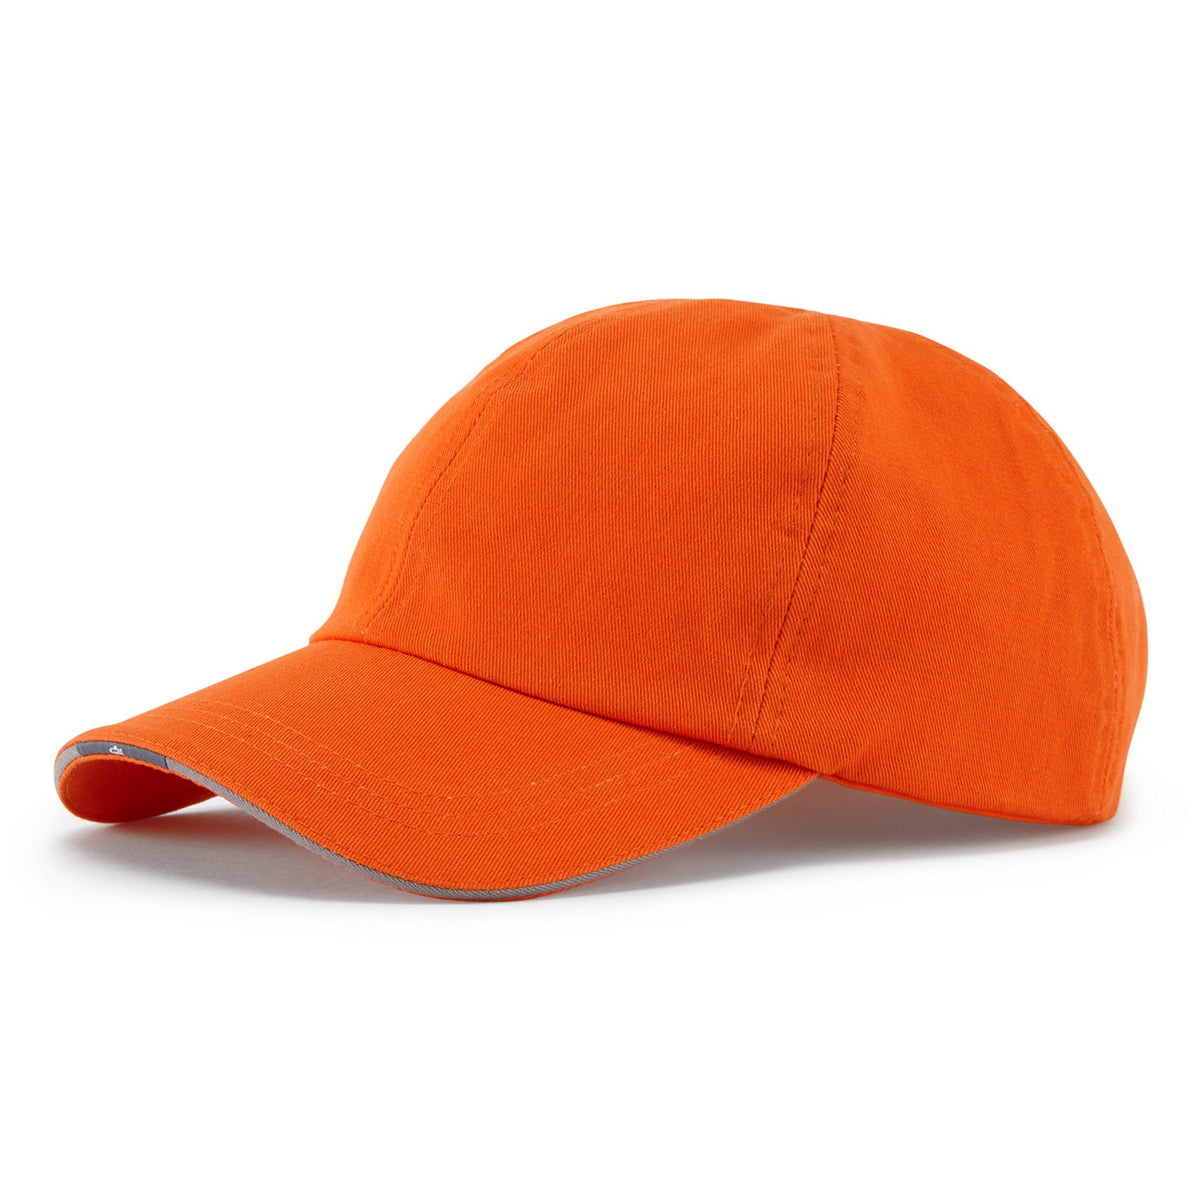 GILL Marine Hat - One Size